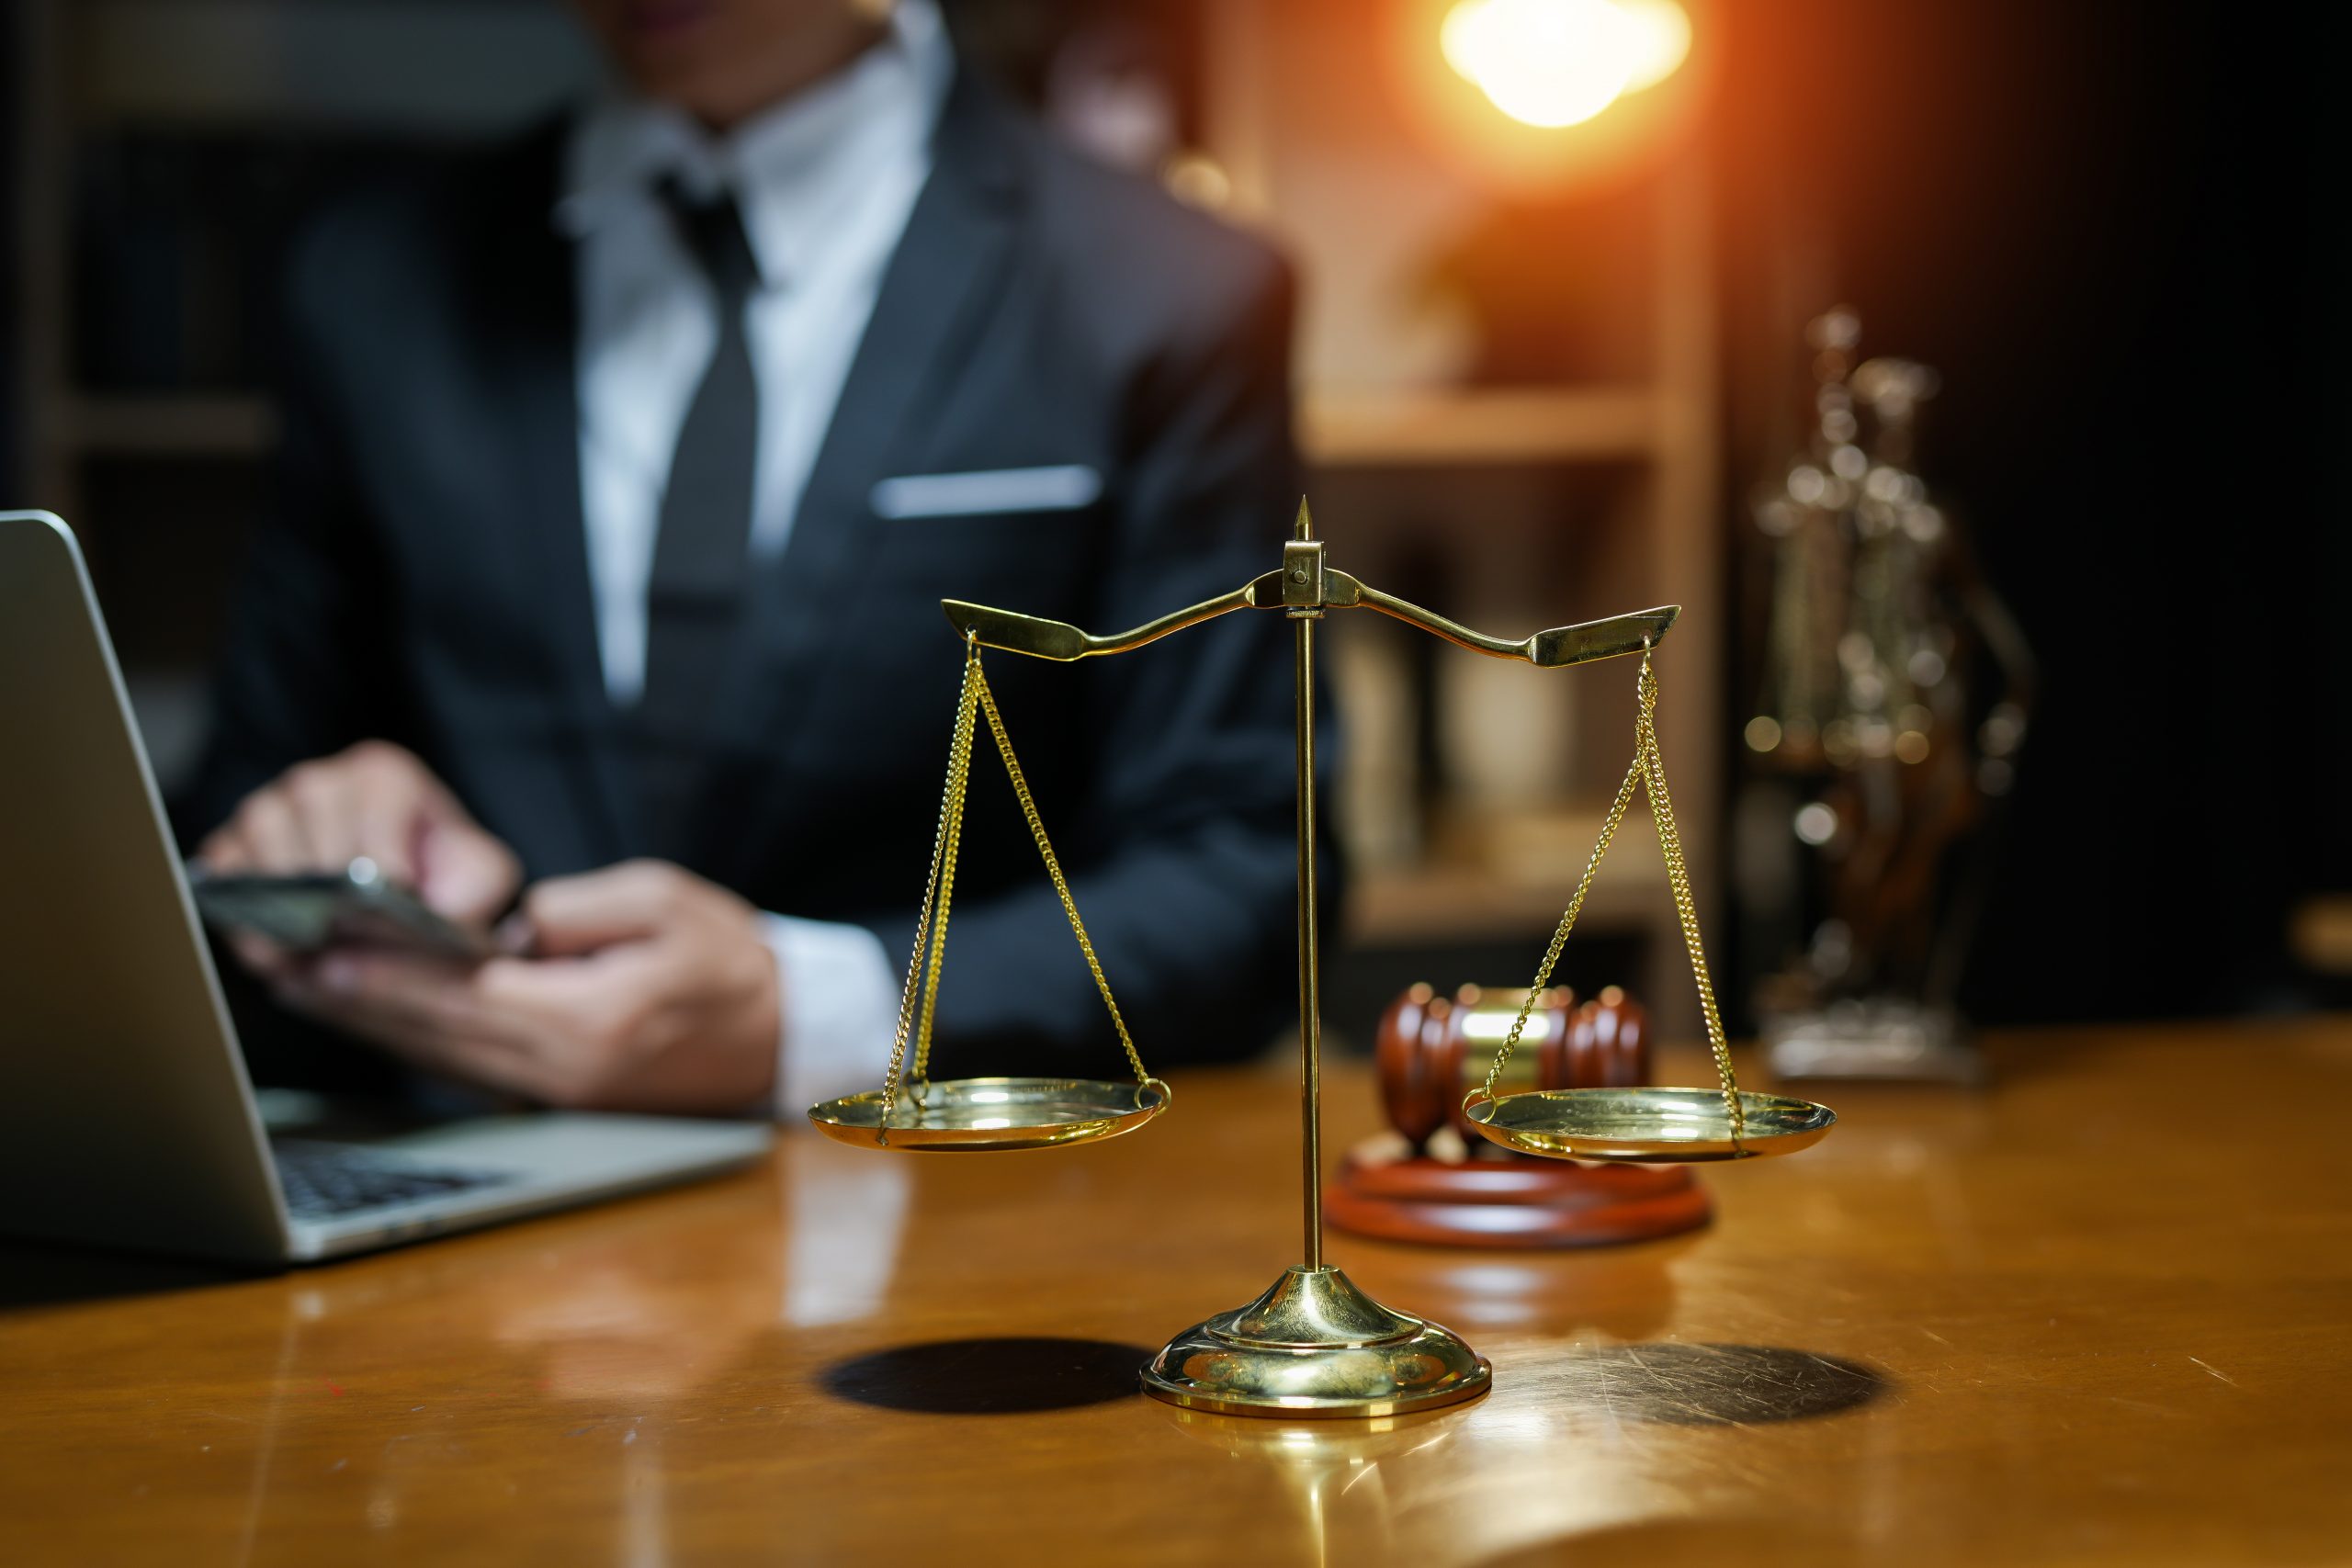 Close-up of a golden balance scale on a wooden desk, with a blurred person in a suit typing on a laptop in the background. A gavel and legal statue are also visible on the desk, suggesting an office where experienced attorneys work diligently to provide justice.